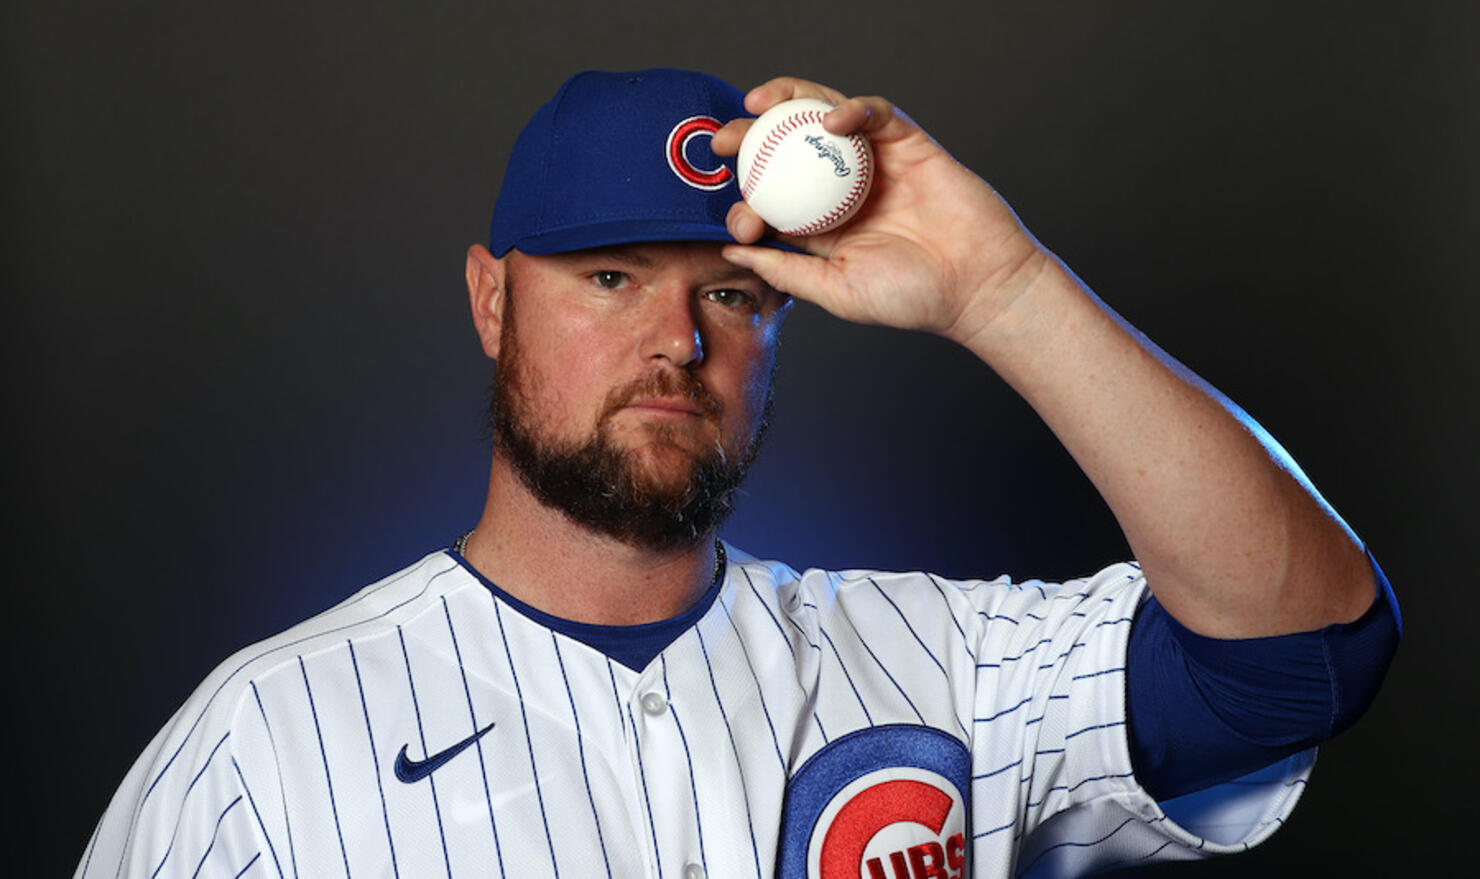 Cubs-Indians: Jon Lester showing he has a lot left in the tank - Chicago  Sun-Times